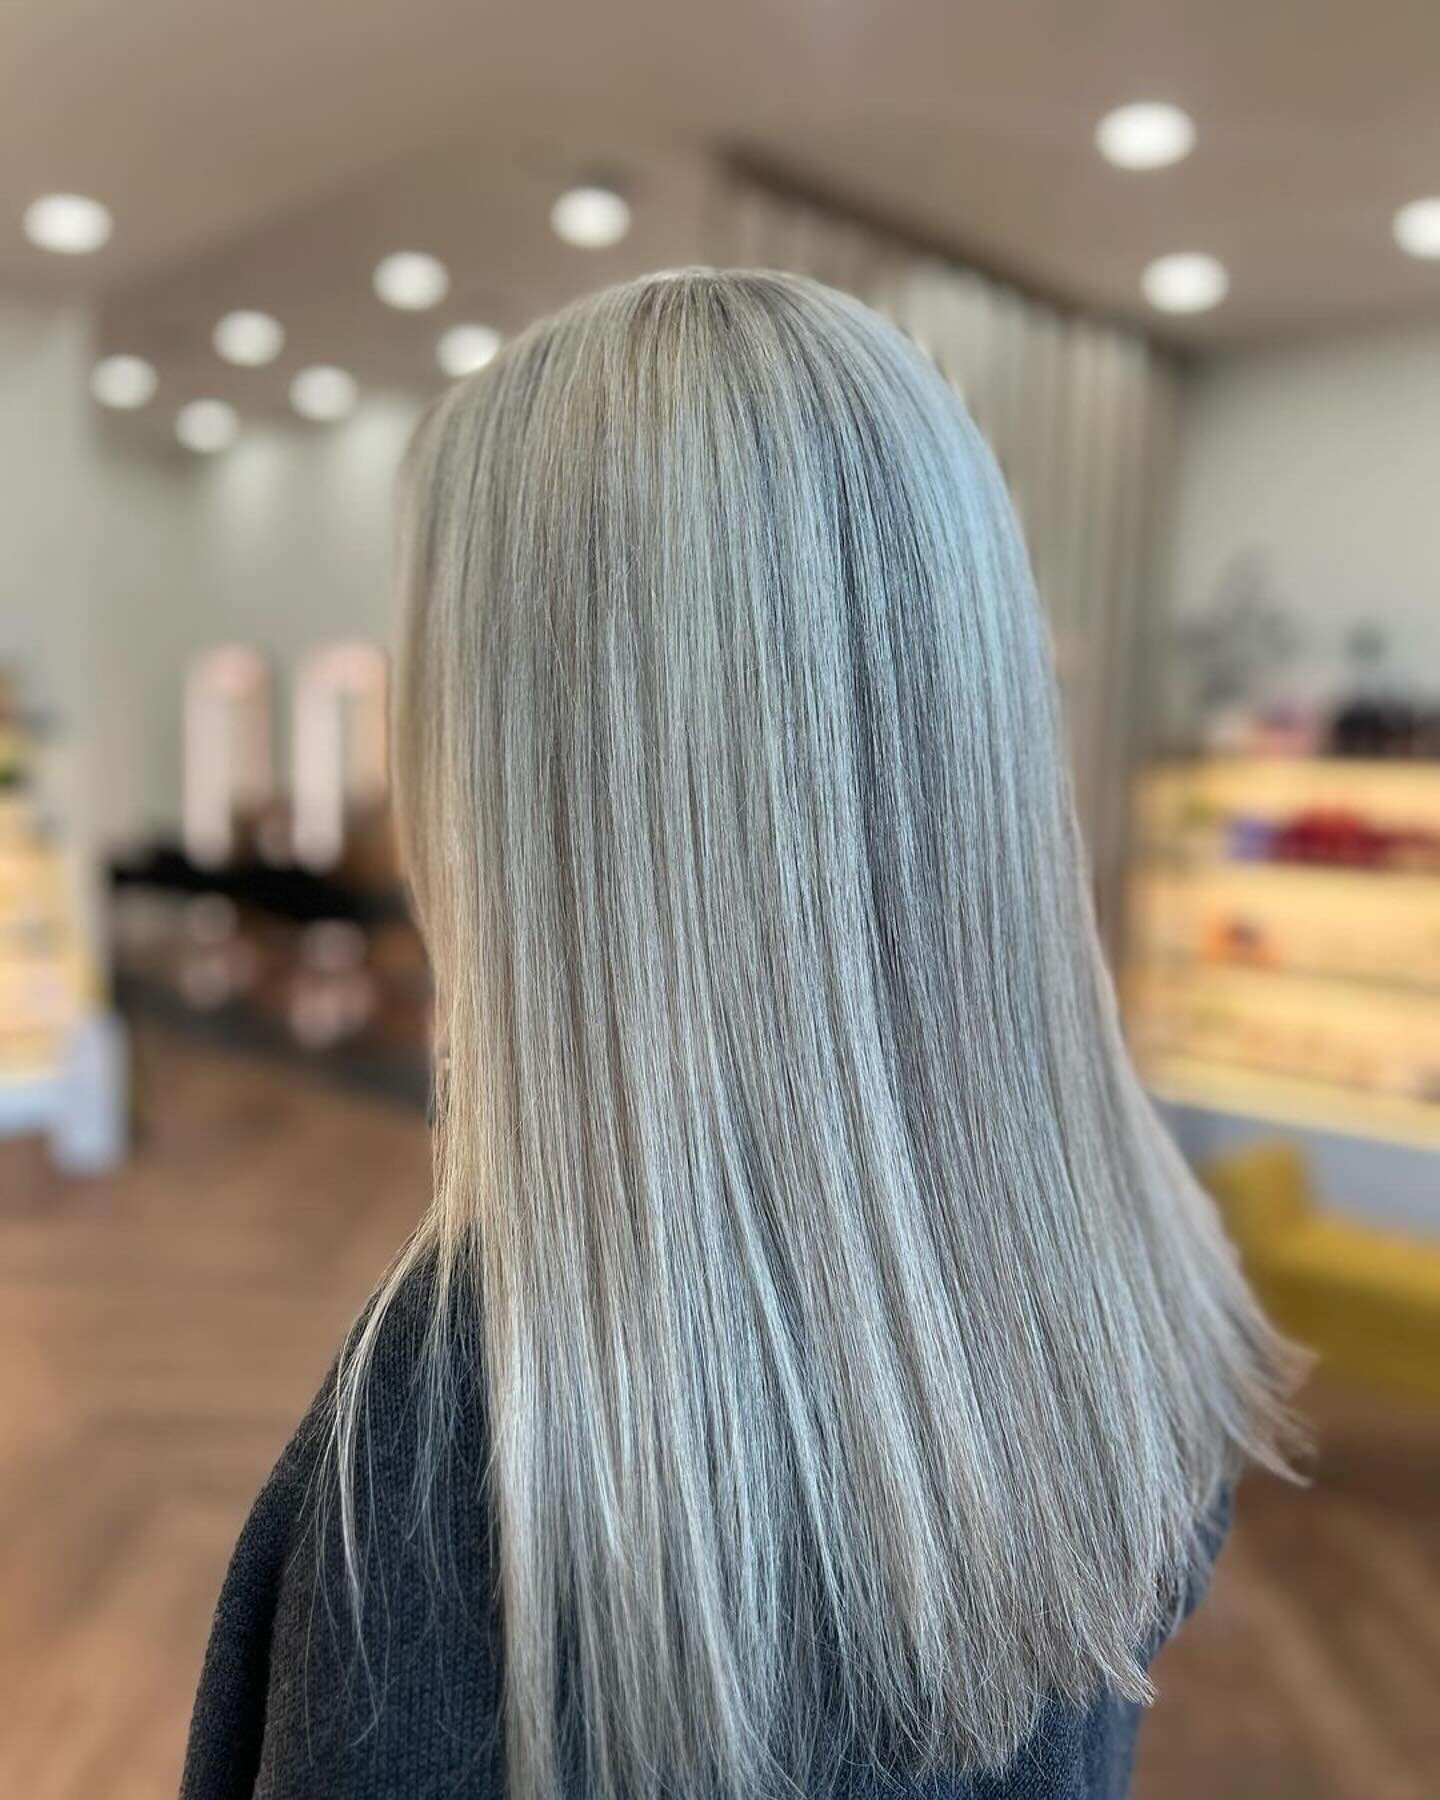 The perfect icy blend 🤍

Thinking 🤔 about embracing your natural grey? Stop in and talk with one of our stylists or book a virtual consultation to start the process today! 
#davantididmyhair #greyhair #avedatexas #dentonsalon #kellersalon #fortwoth